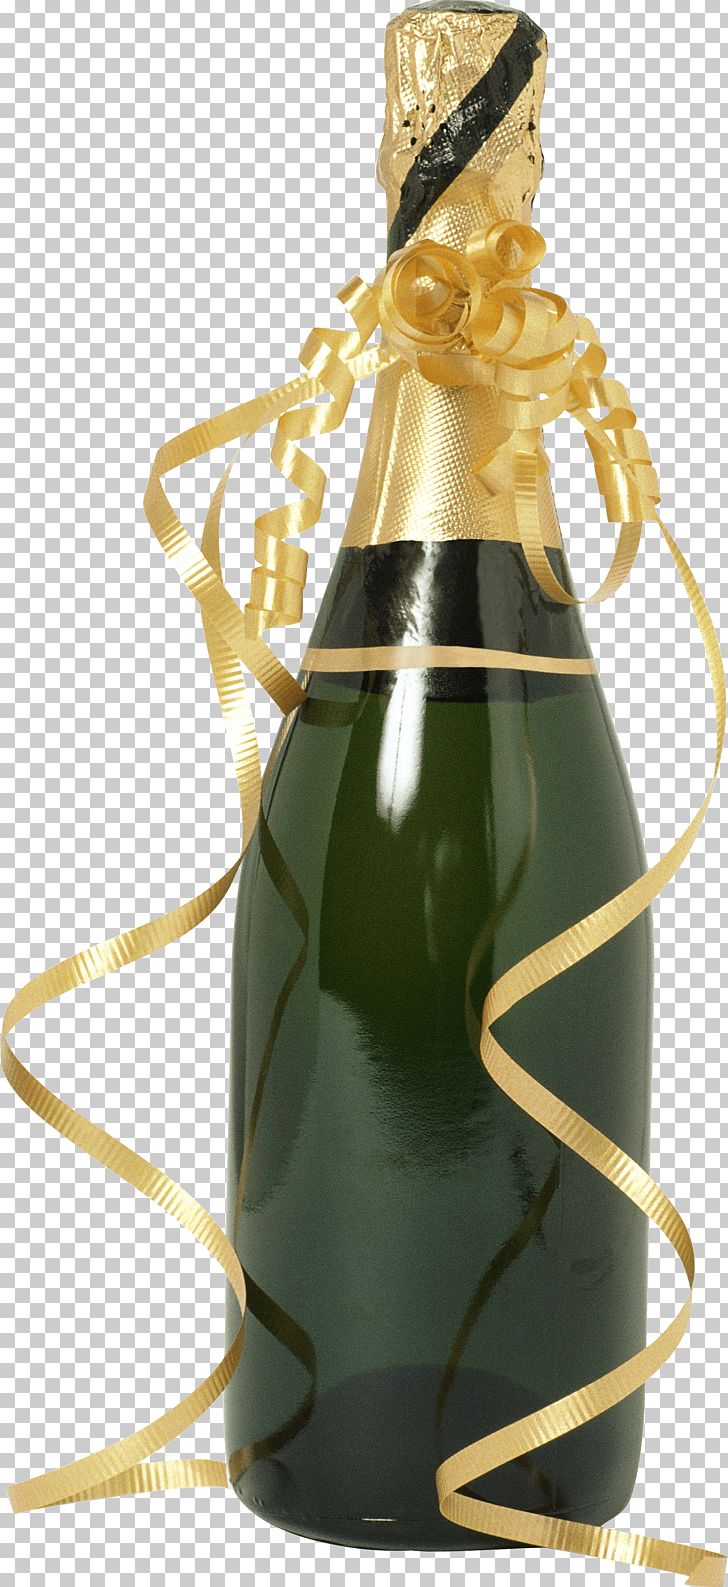 Champagne Wine Cocktail Hot Buttered Rum Beer PNG, Clipart, Beautiful, Candle, Champagne, Champagne Glass, Champagne Wine Free PNG Download